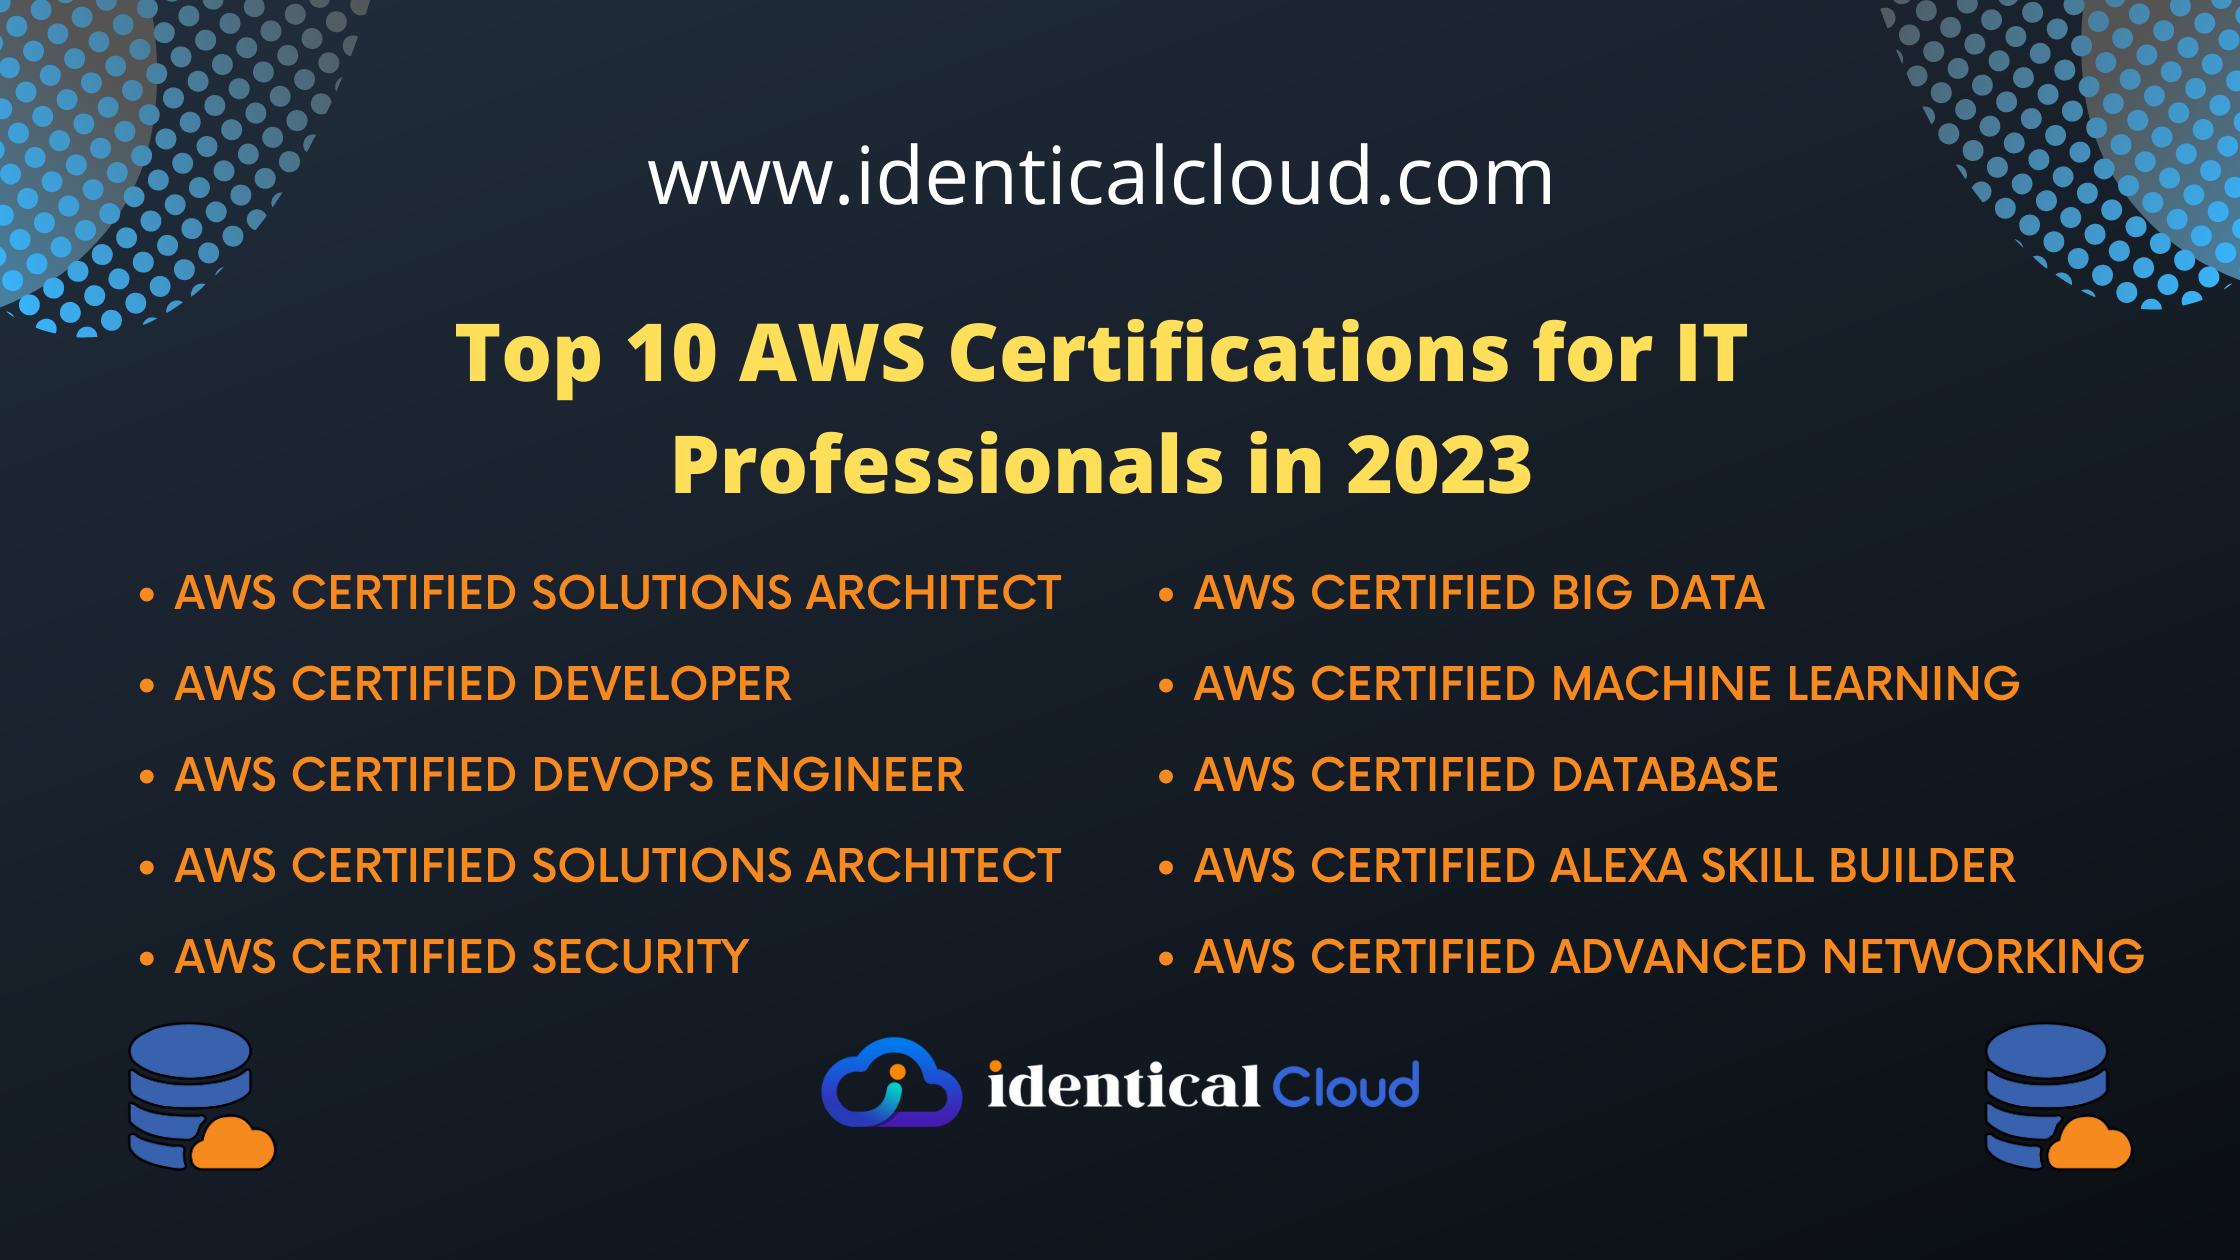 Top 10 AWS Certifications for IT Professionals in 2023